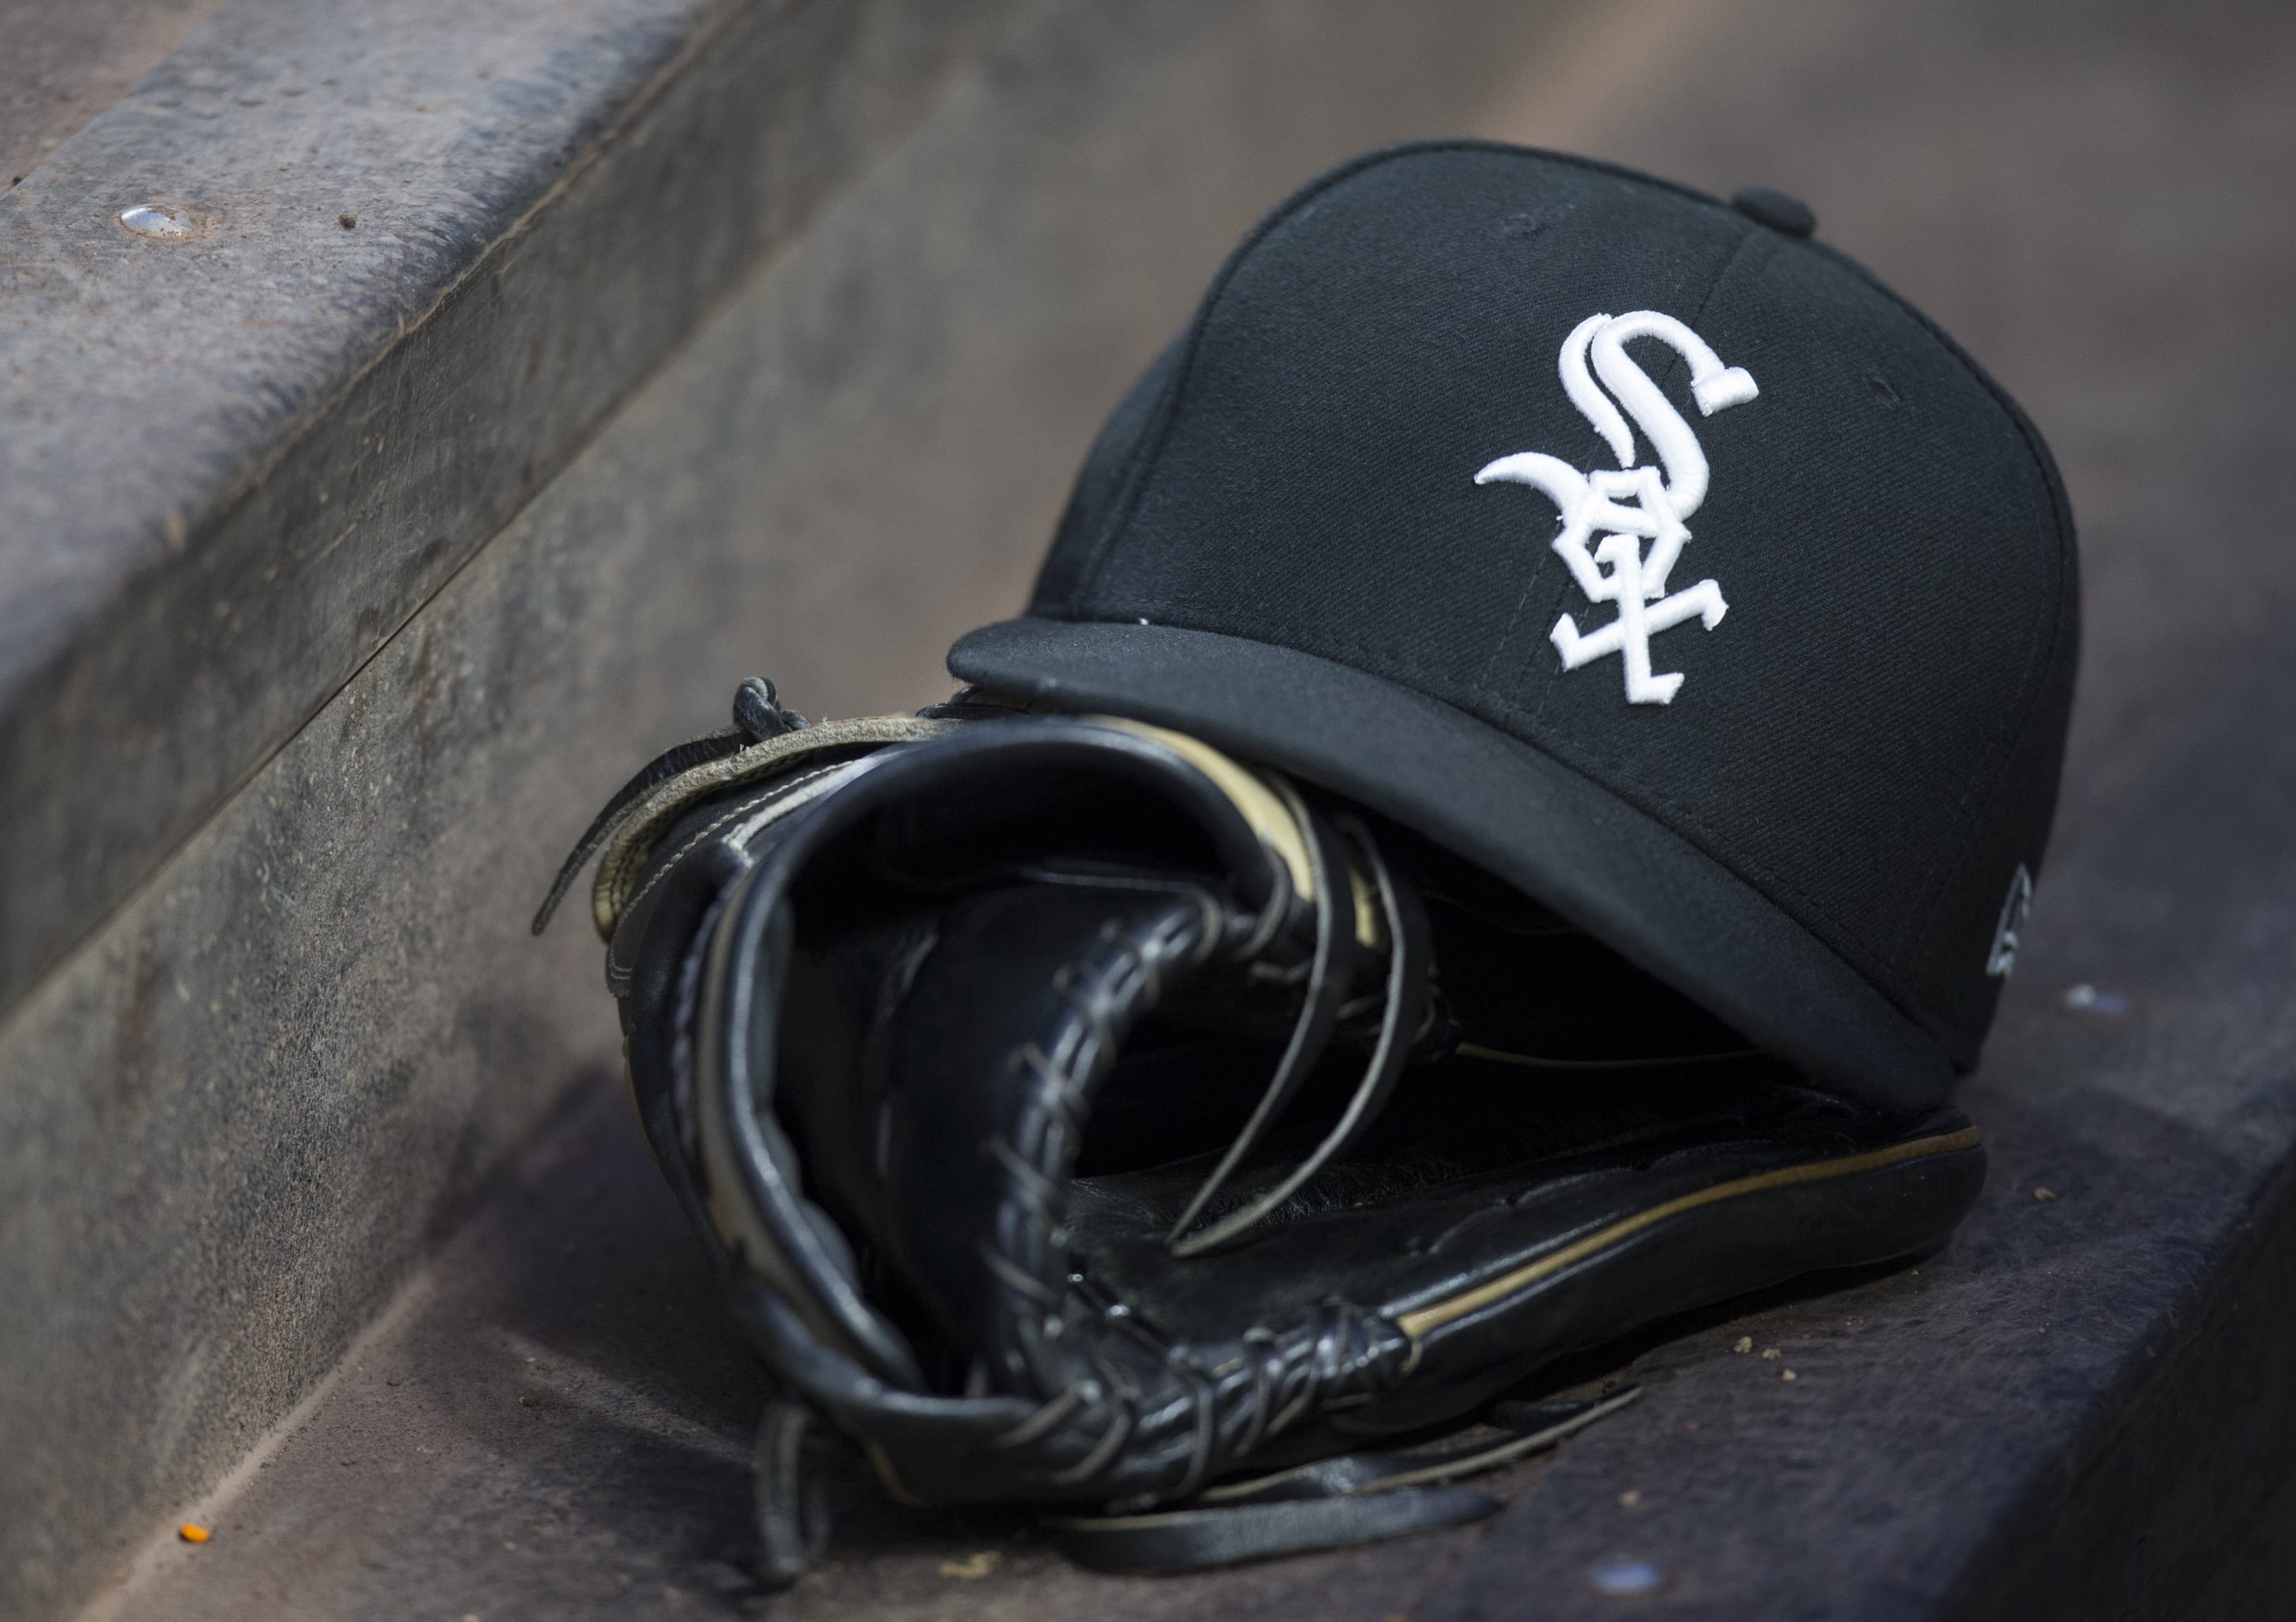 A Chicago White Sox hat and glove are pictured on the steps of the dugout.